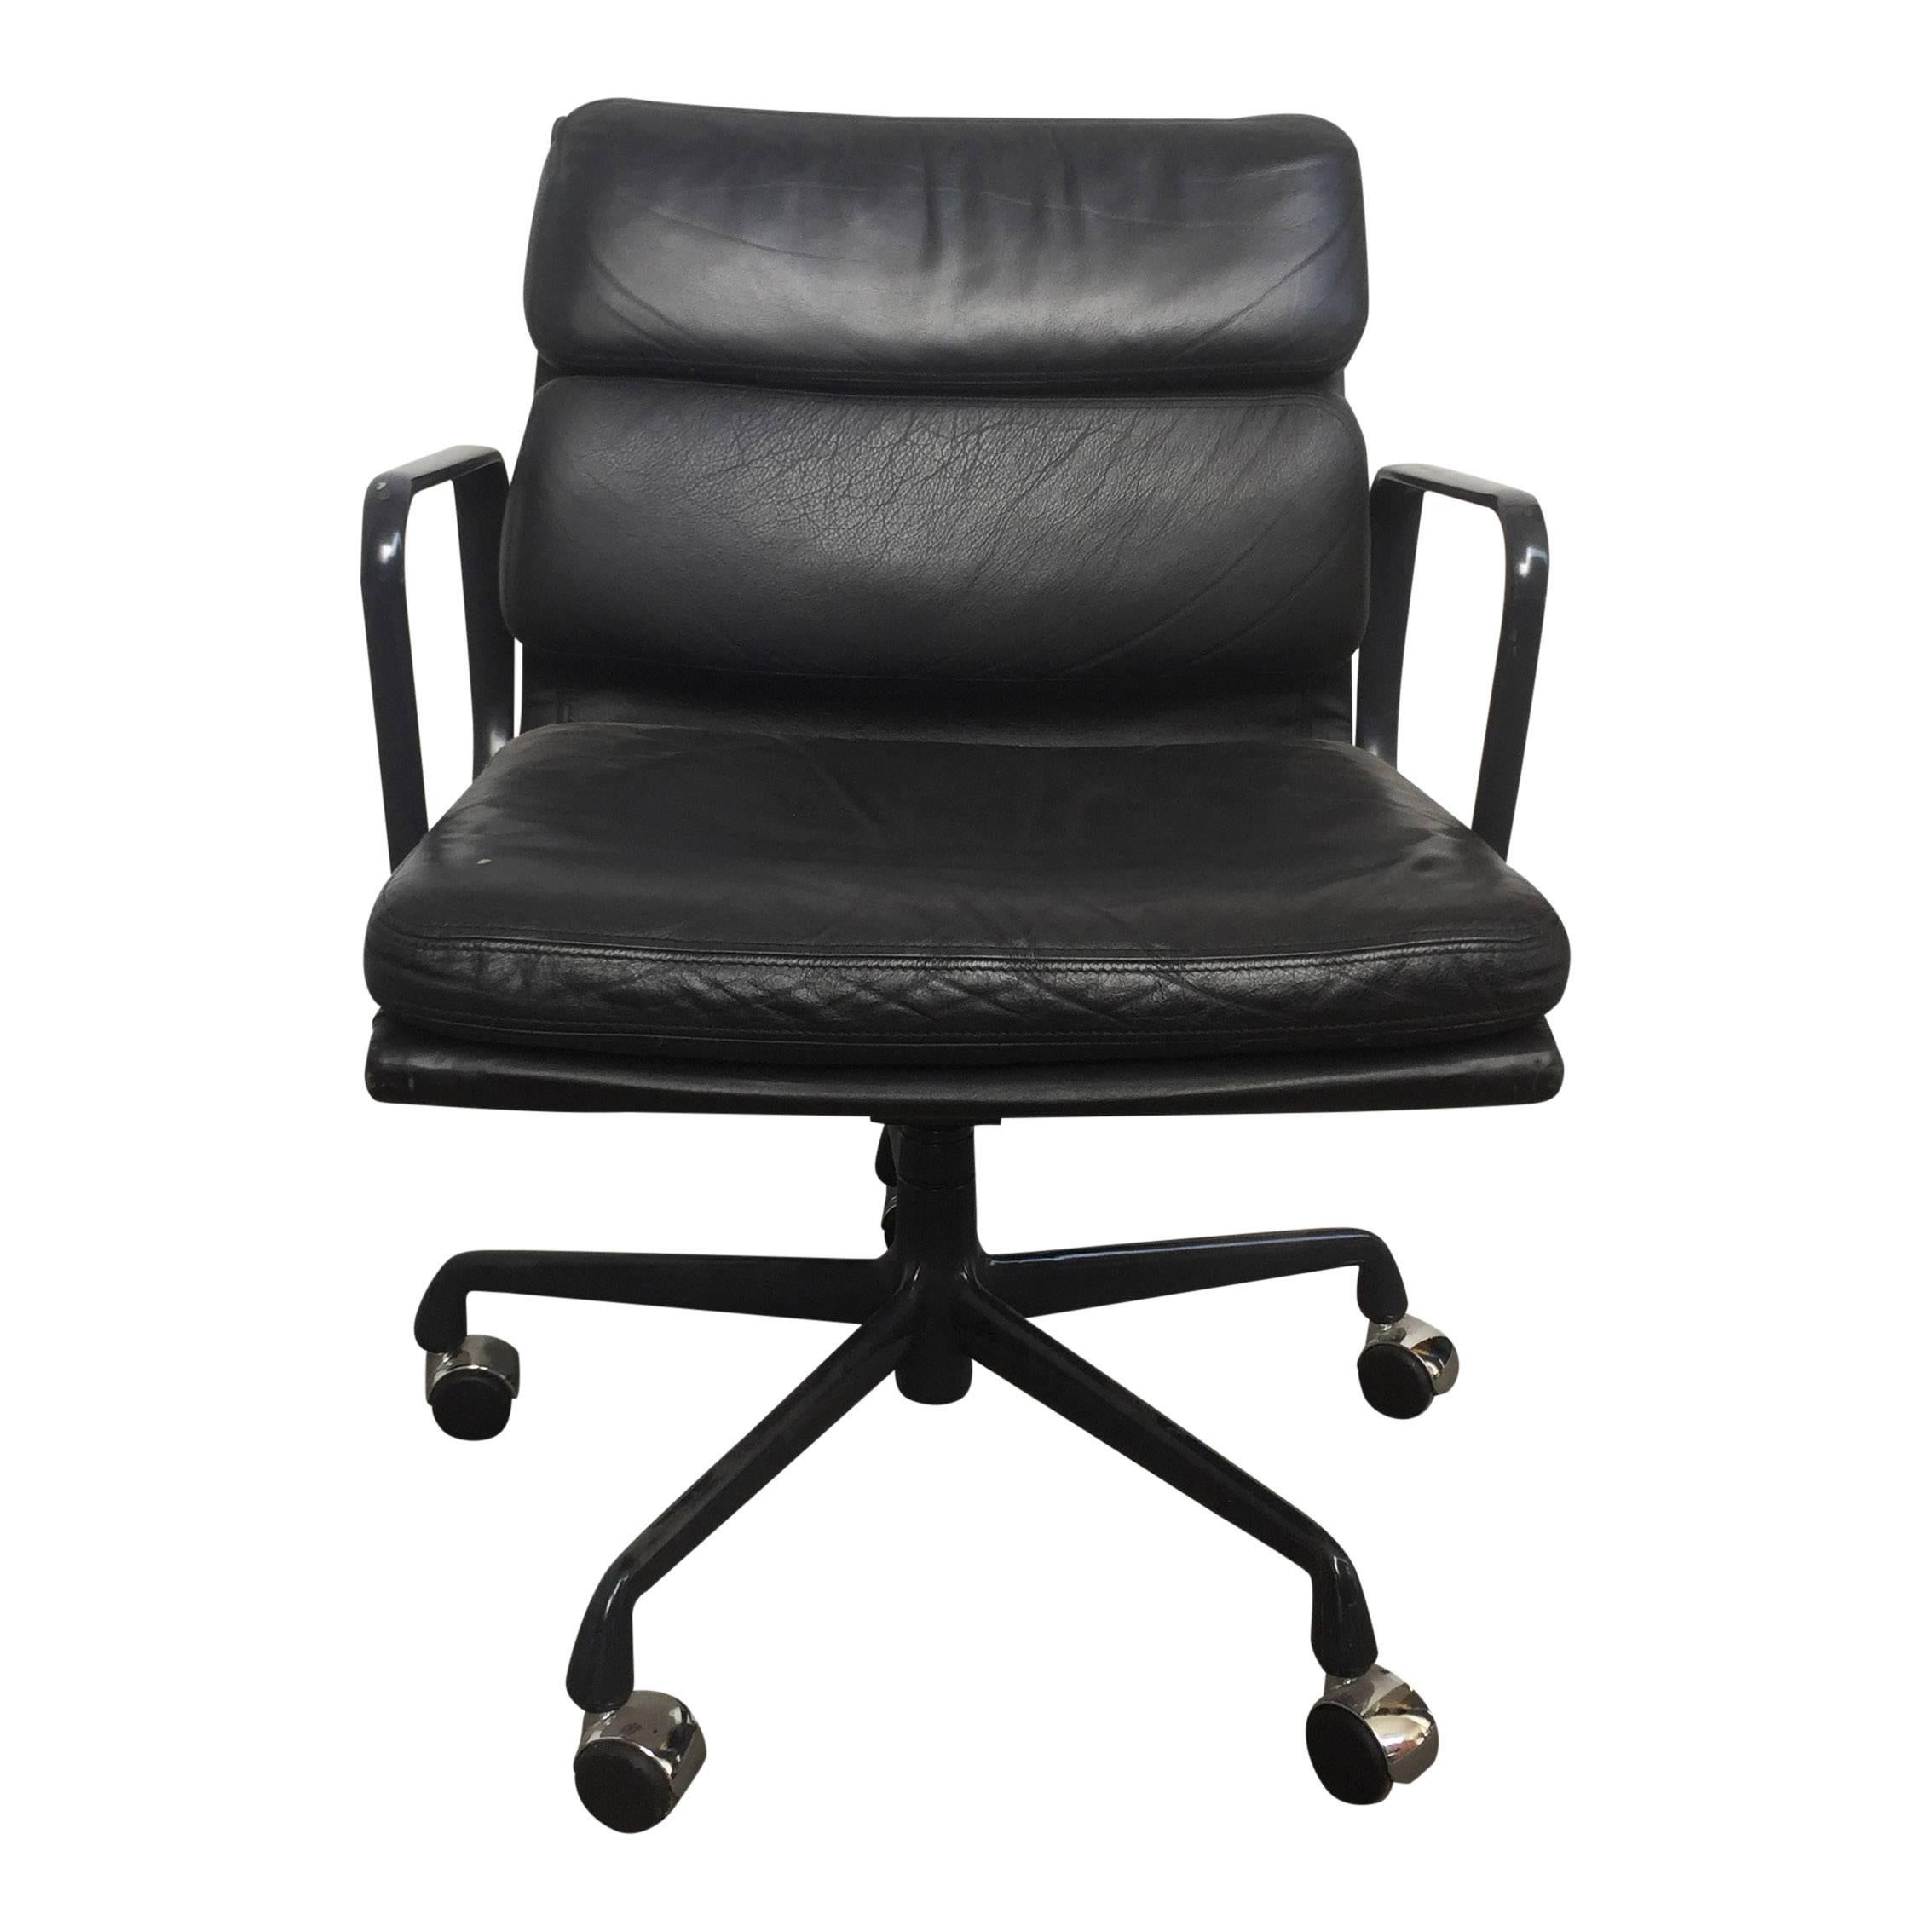 For your consideration at up to 17 authentic Eames for Herman Miller vintage soft pad chairs in black leather with low backs. 

These authentic vintage examples are icons of Mid-Century modern design. The chairs — part of the Eames Aluminum group